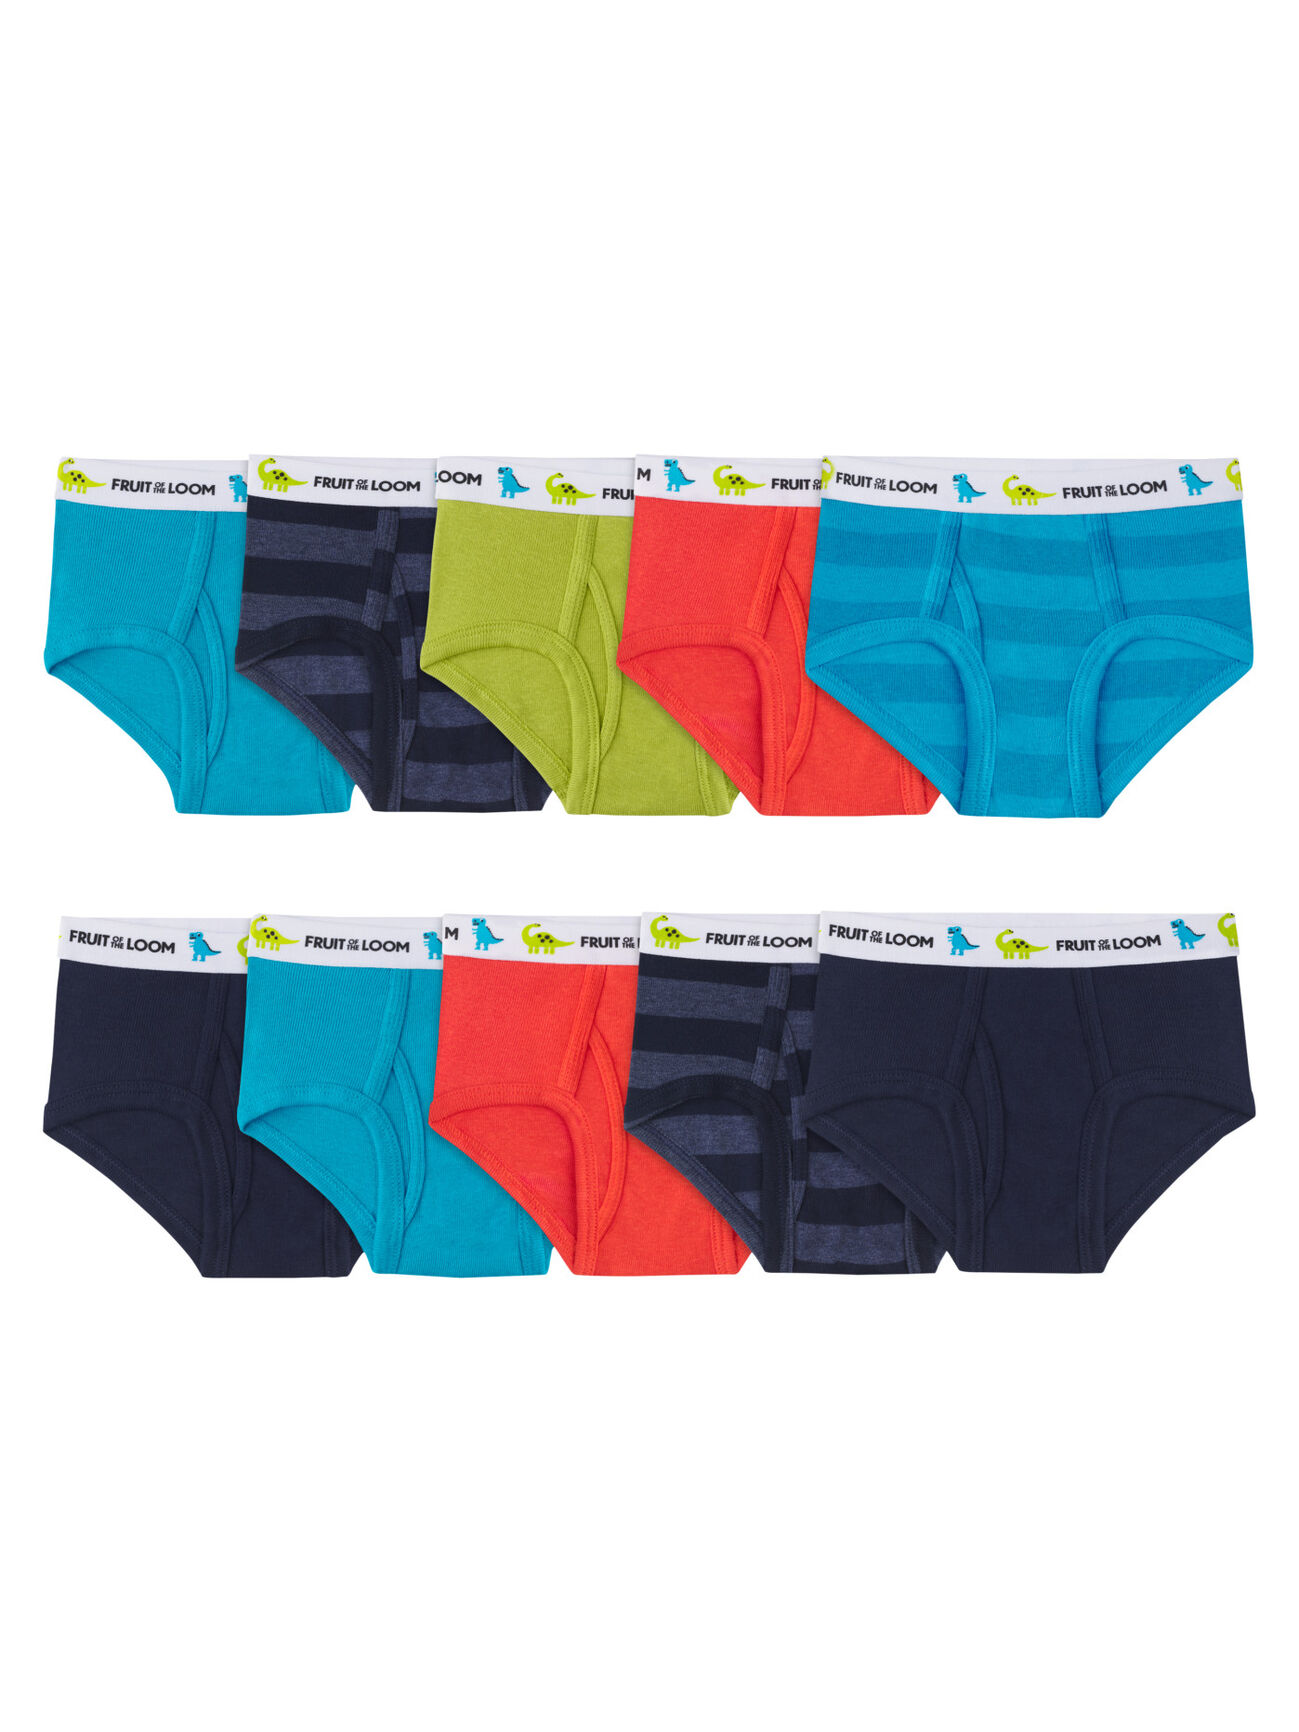 Fruit of the Loom® Signature Boys Size Large Tag-Free Boxer Briefs  (10-Pack) 